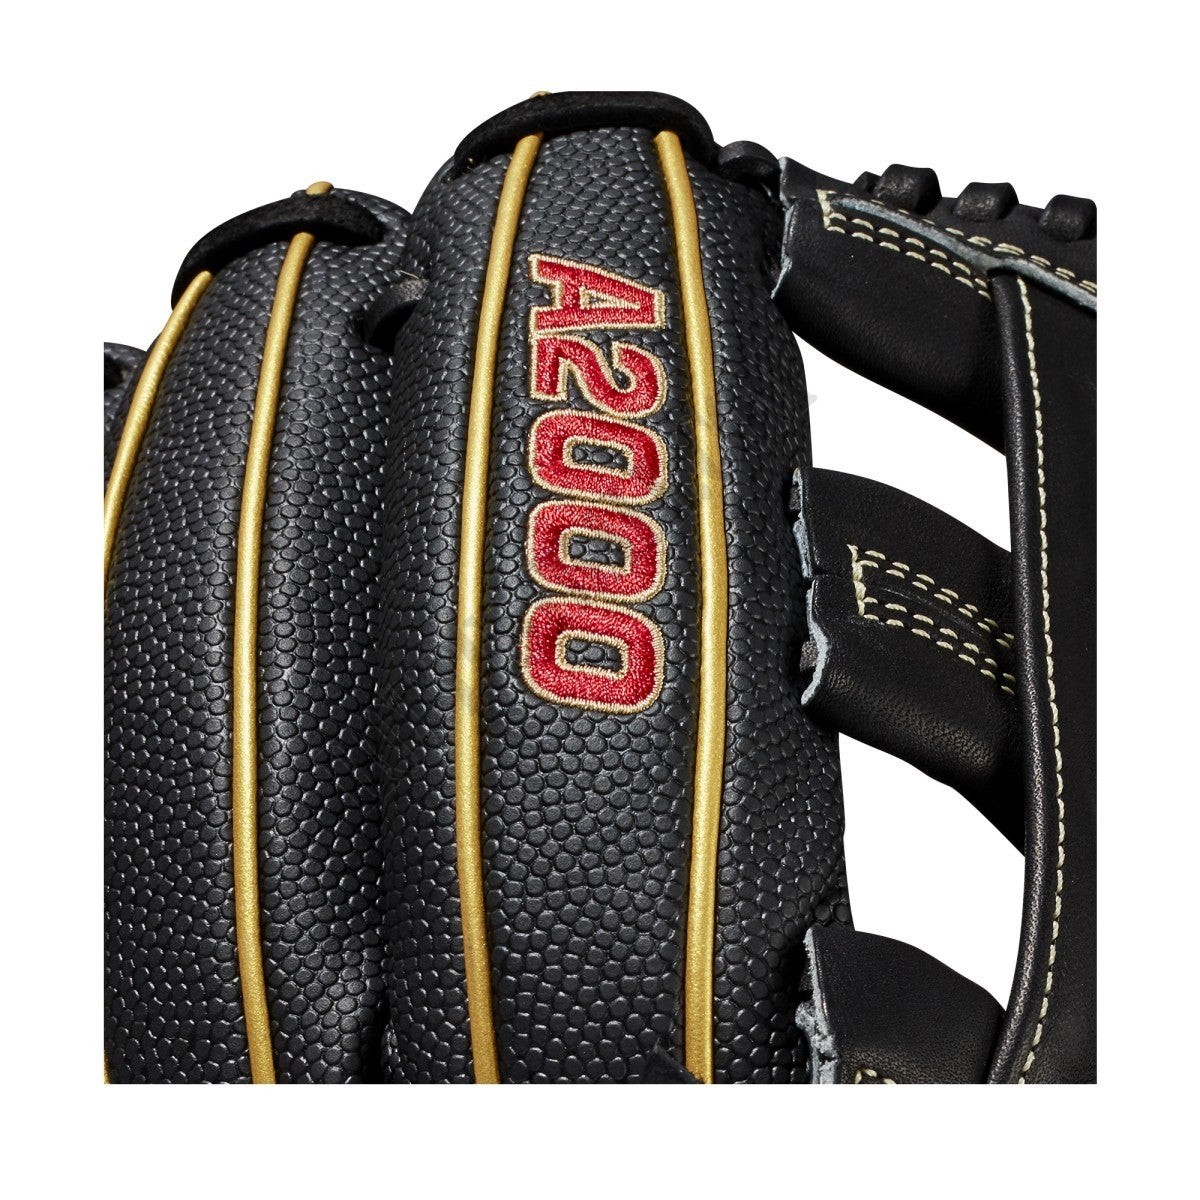 2021 A2000 SR32 GM 12" Infield Fastpitch Glove ● Wilson Promotions - -6